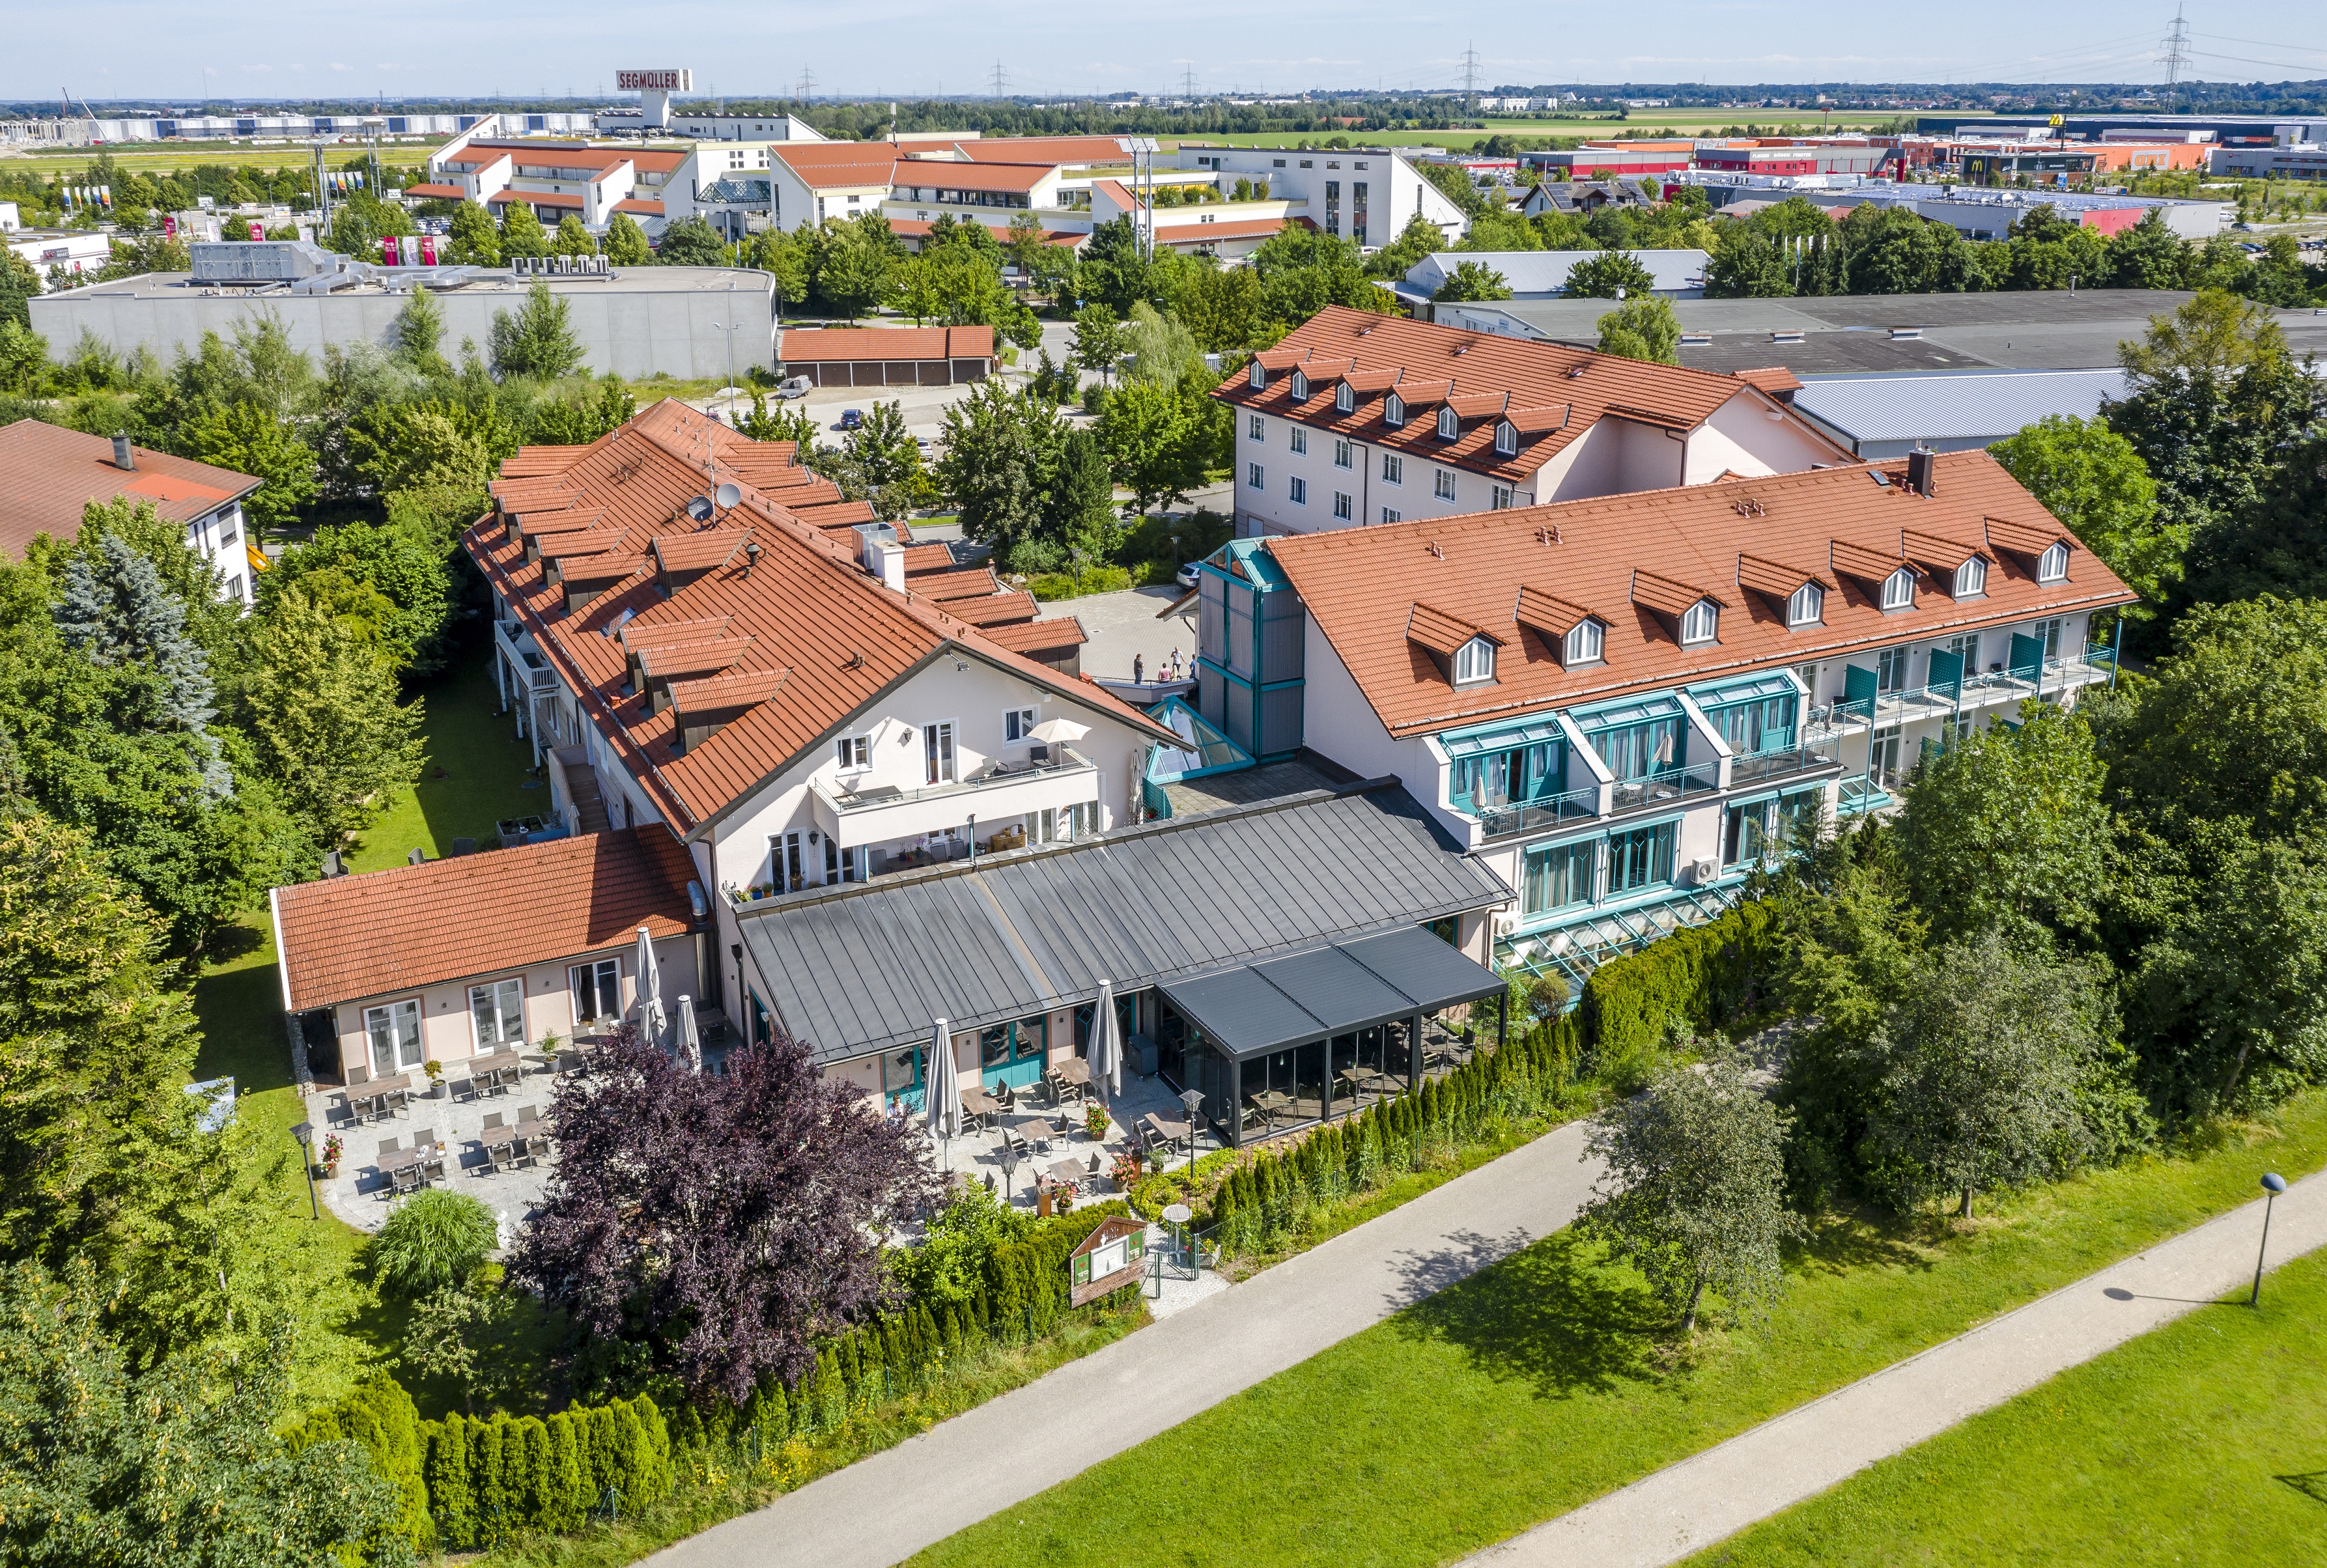 Best Western Plus Hotel Erb <br/>124.00 ew <br/> <a href='http://vakantieoplossing.nl/outpage/?id=f4ba699e7826245e24dcc1f3db222956' target='_blank'>View Details</a>